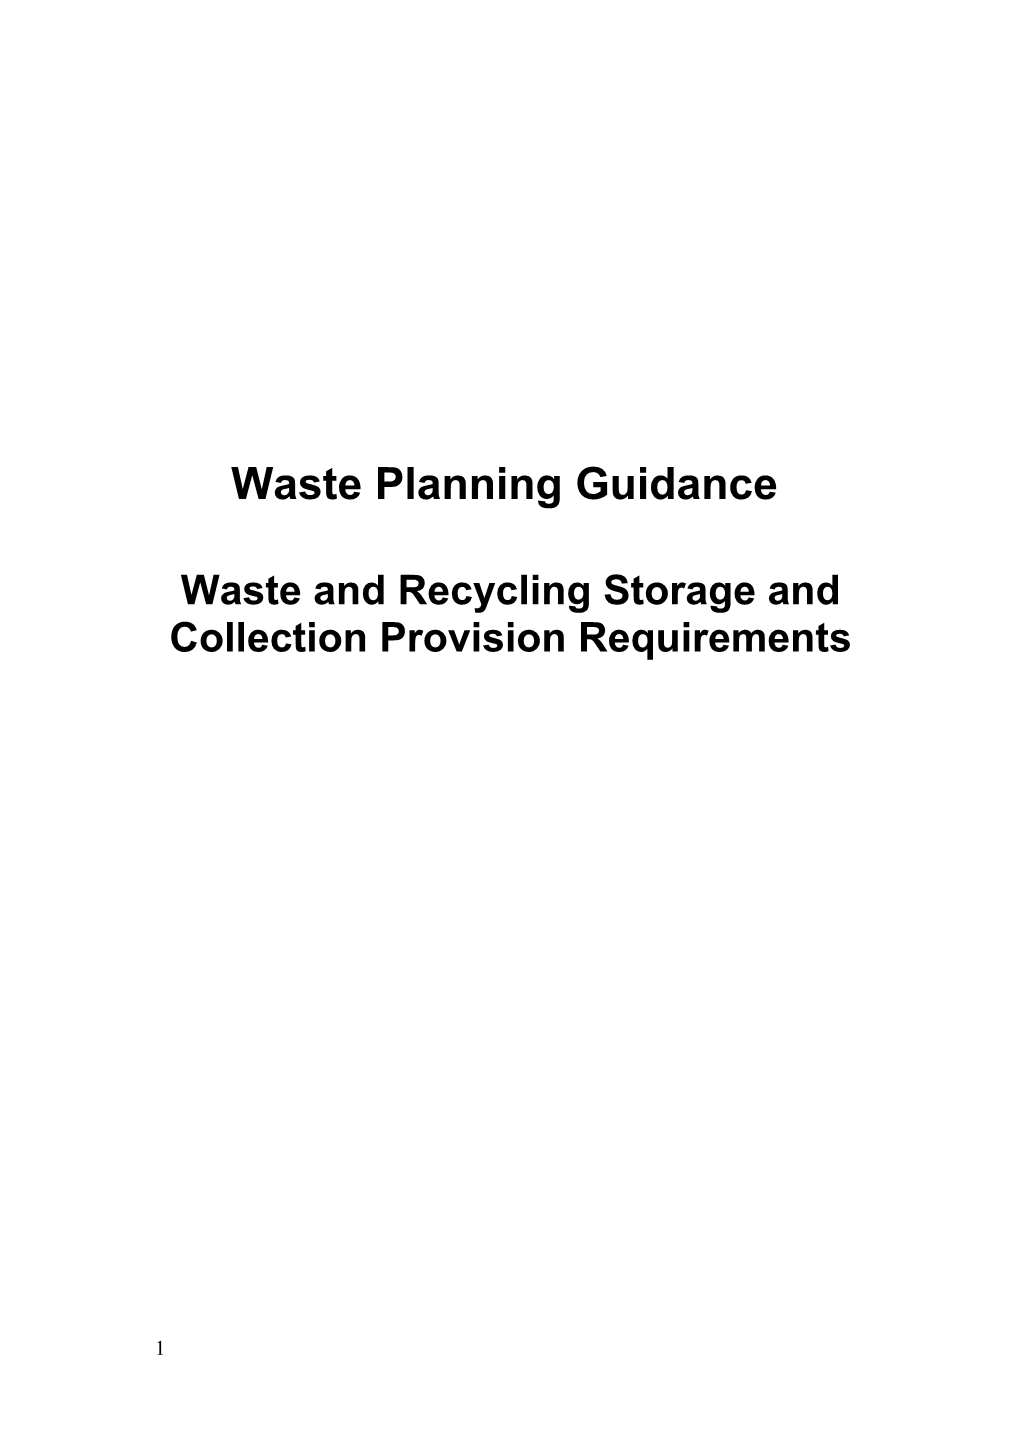 Waste Management Guidance for New Developments